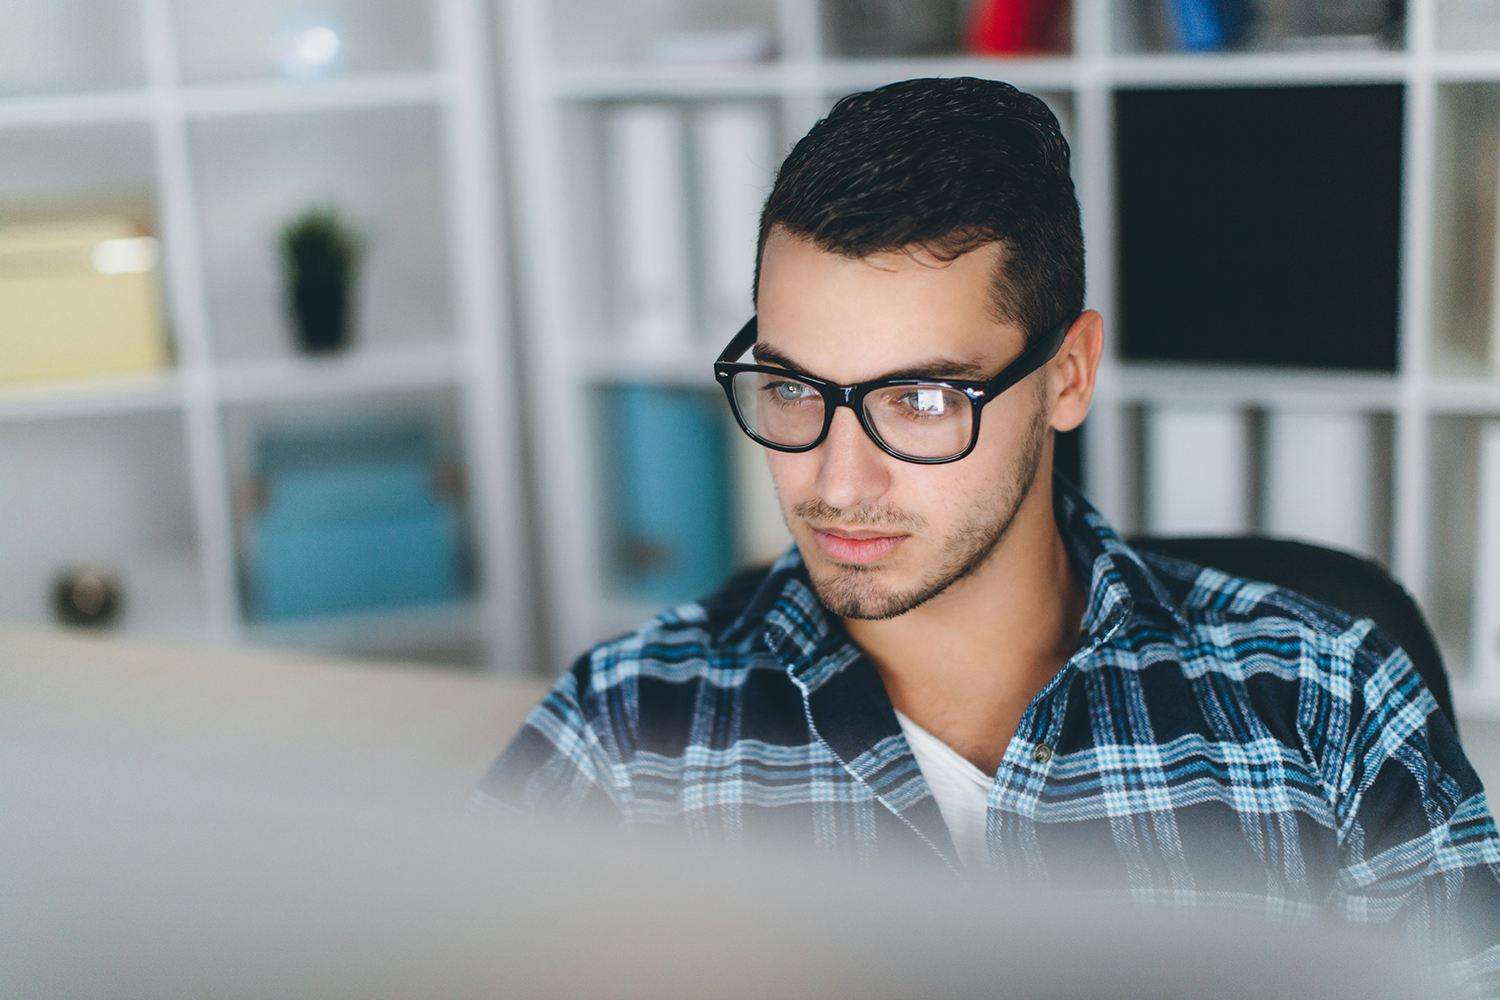 Image of man looking at computer with reflection on his glasses.